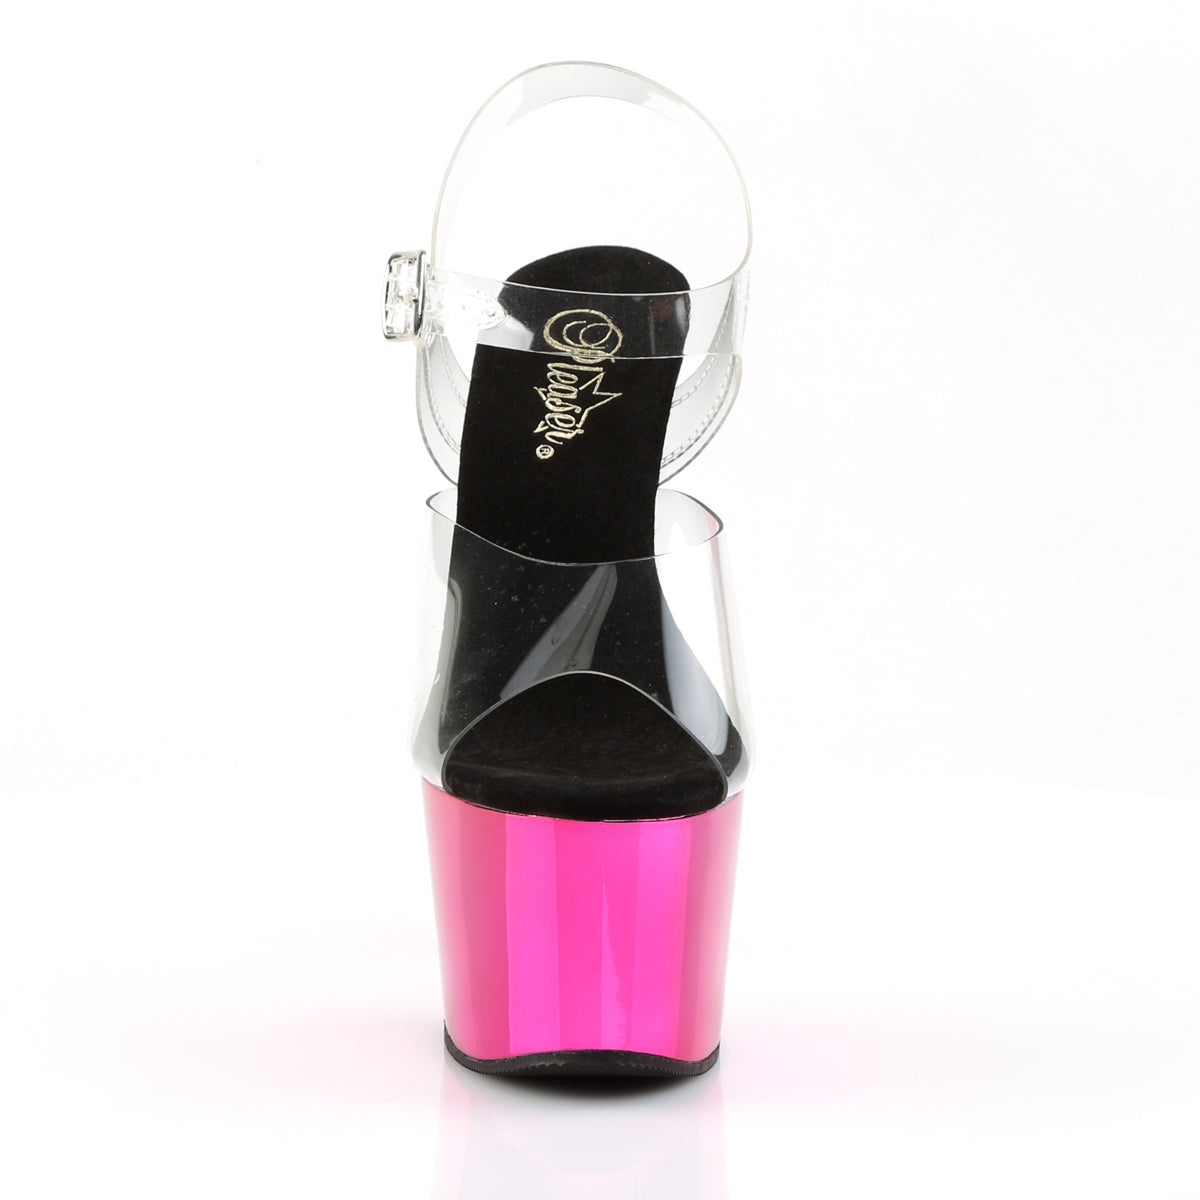 ADORE-708 7 Inch Clear & Hot Pink Chrome Pole Dancer Sandal-Pleaser- Sexy Shoes Alternative Footwear